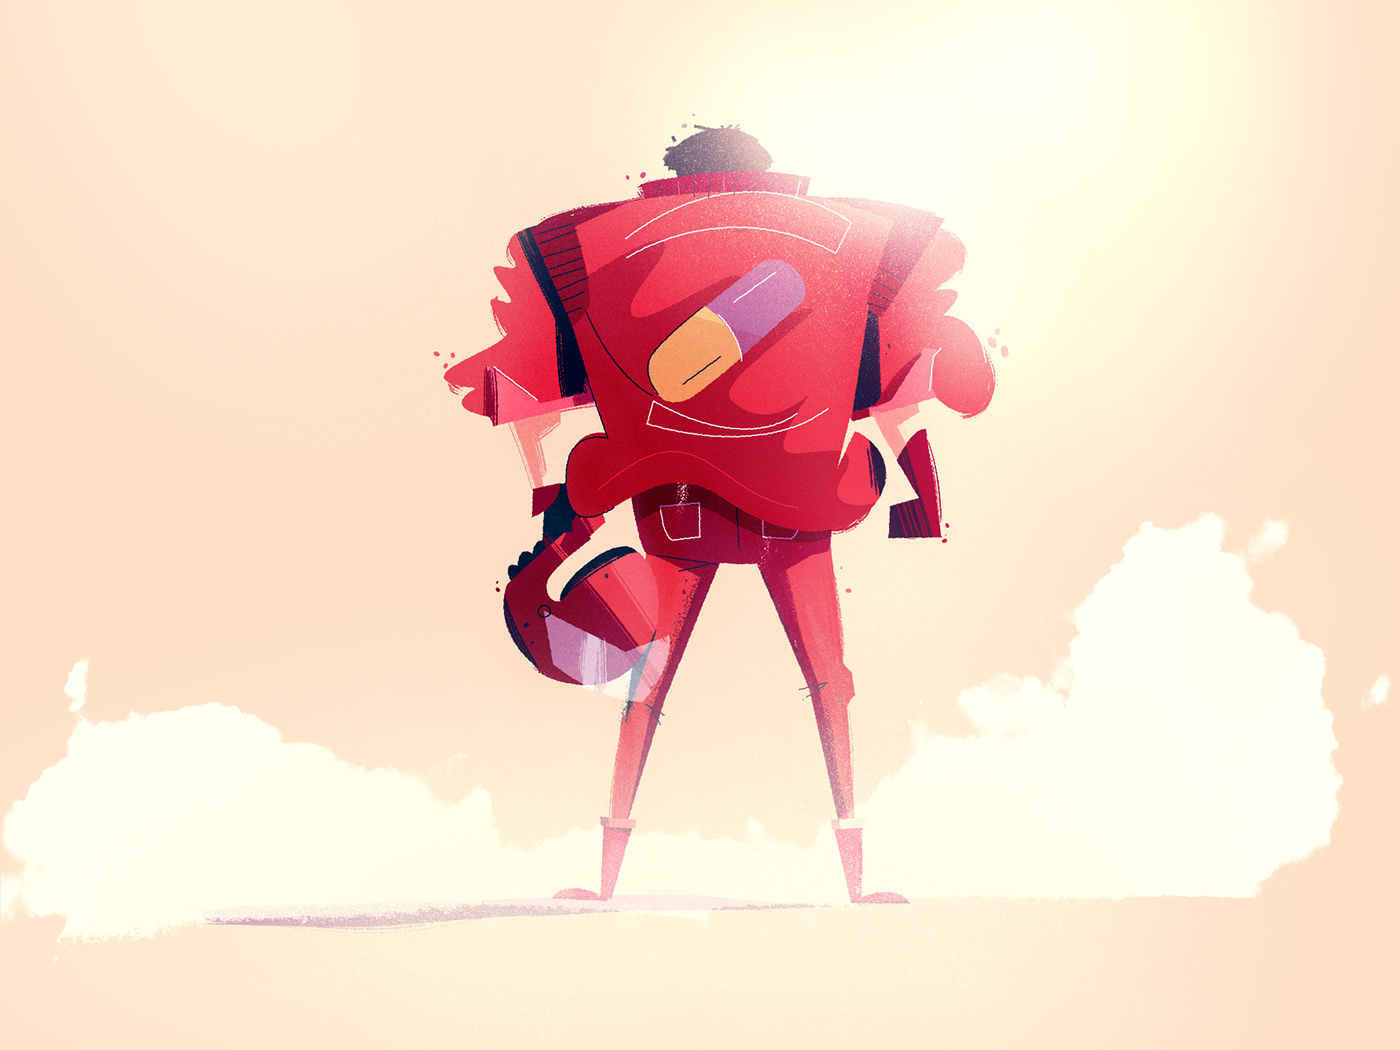 Kaneda from Akira standing with his back to the camera, smoke at his feet holding a  helmet